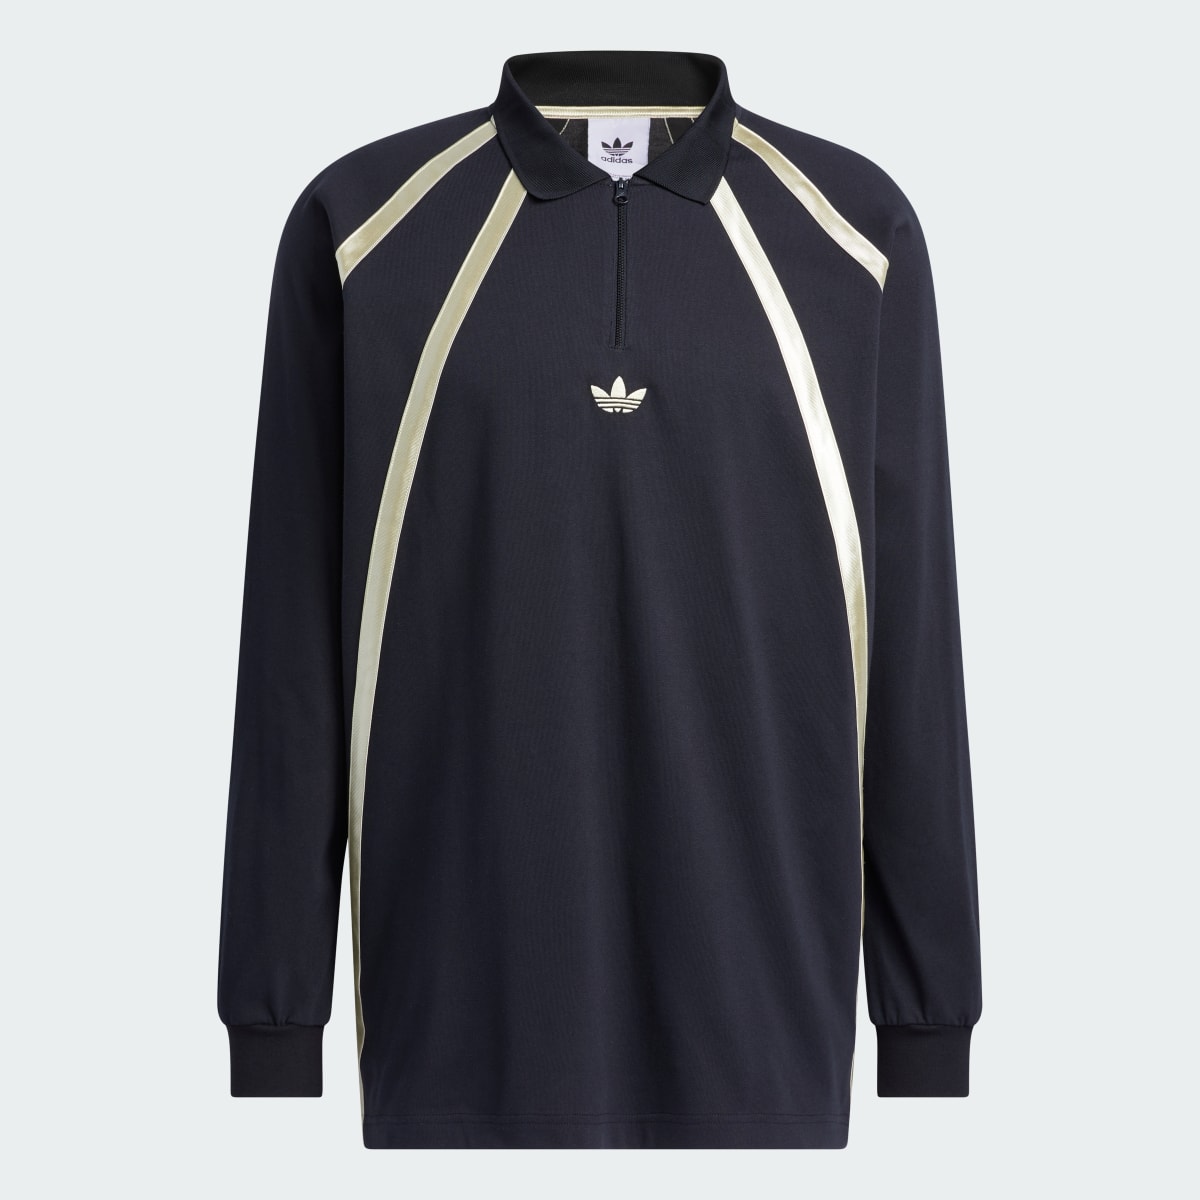 Adidas Rugby Long Sleeve Polo Shirt (Gender Neutral). 4